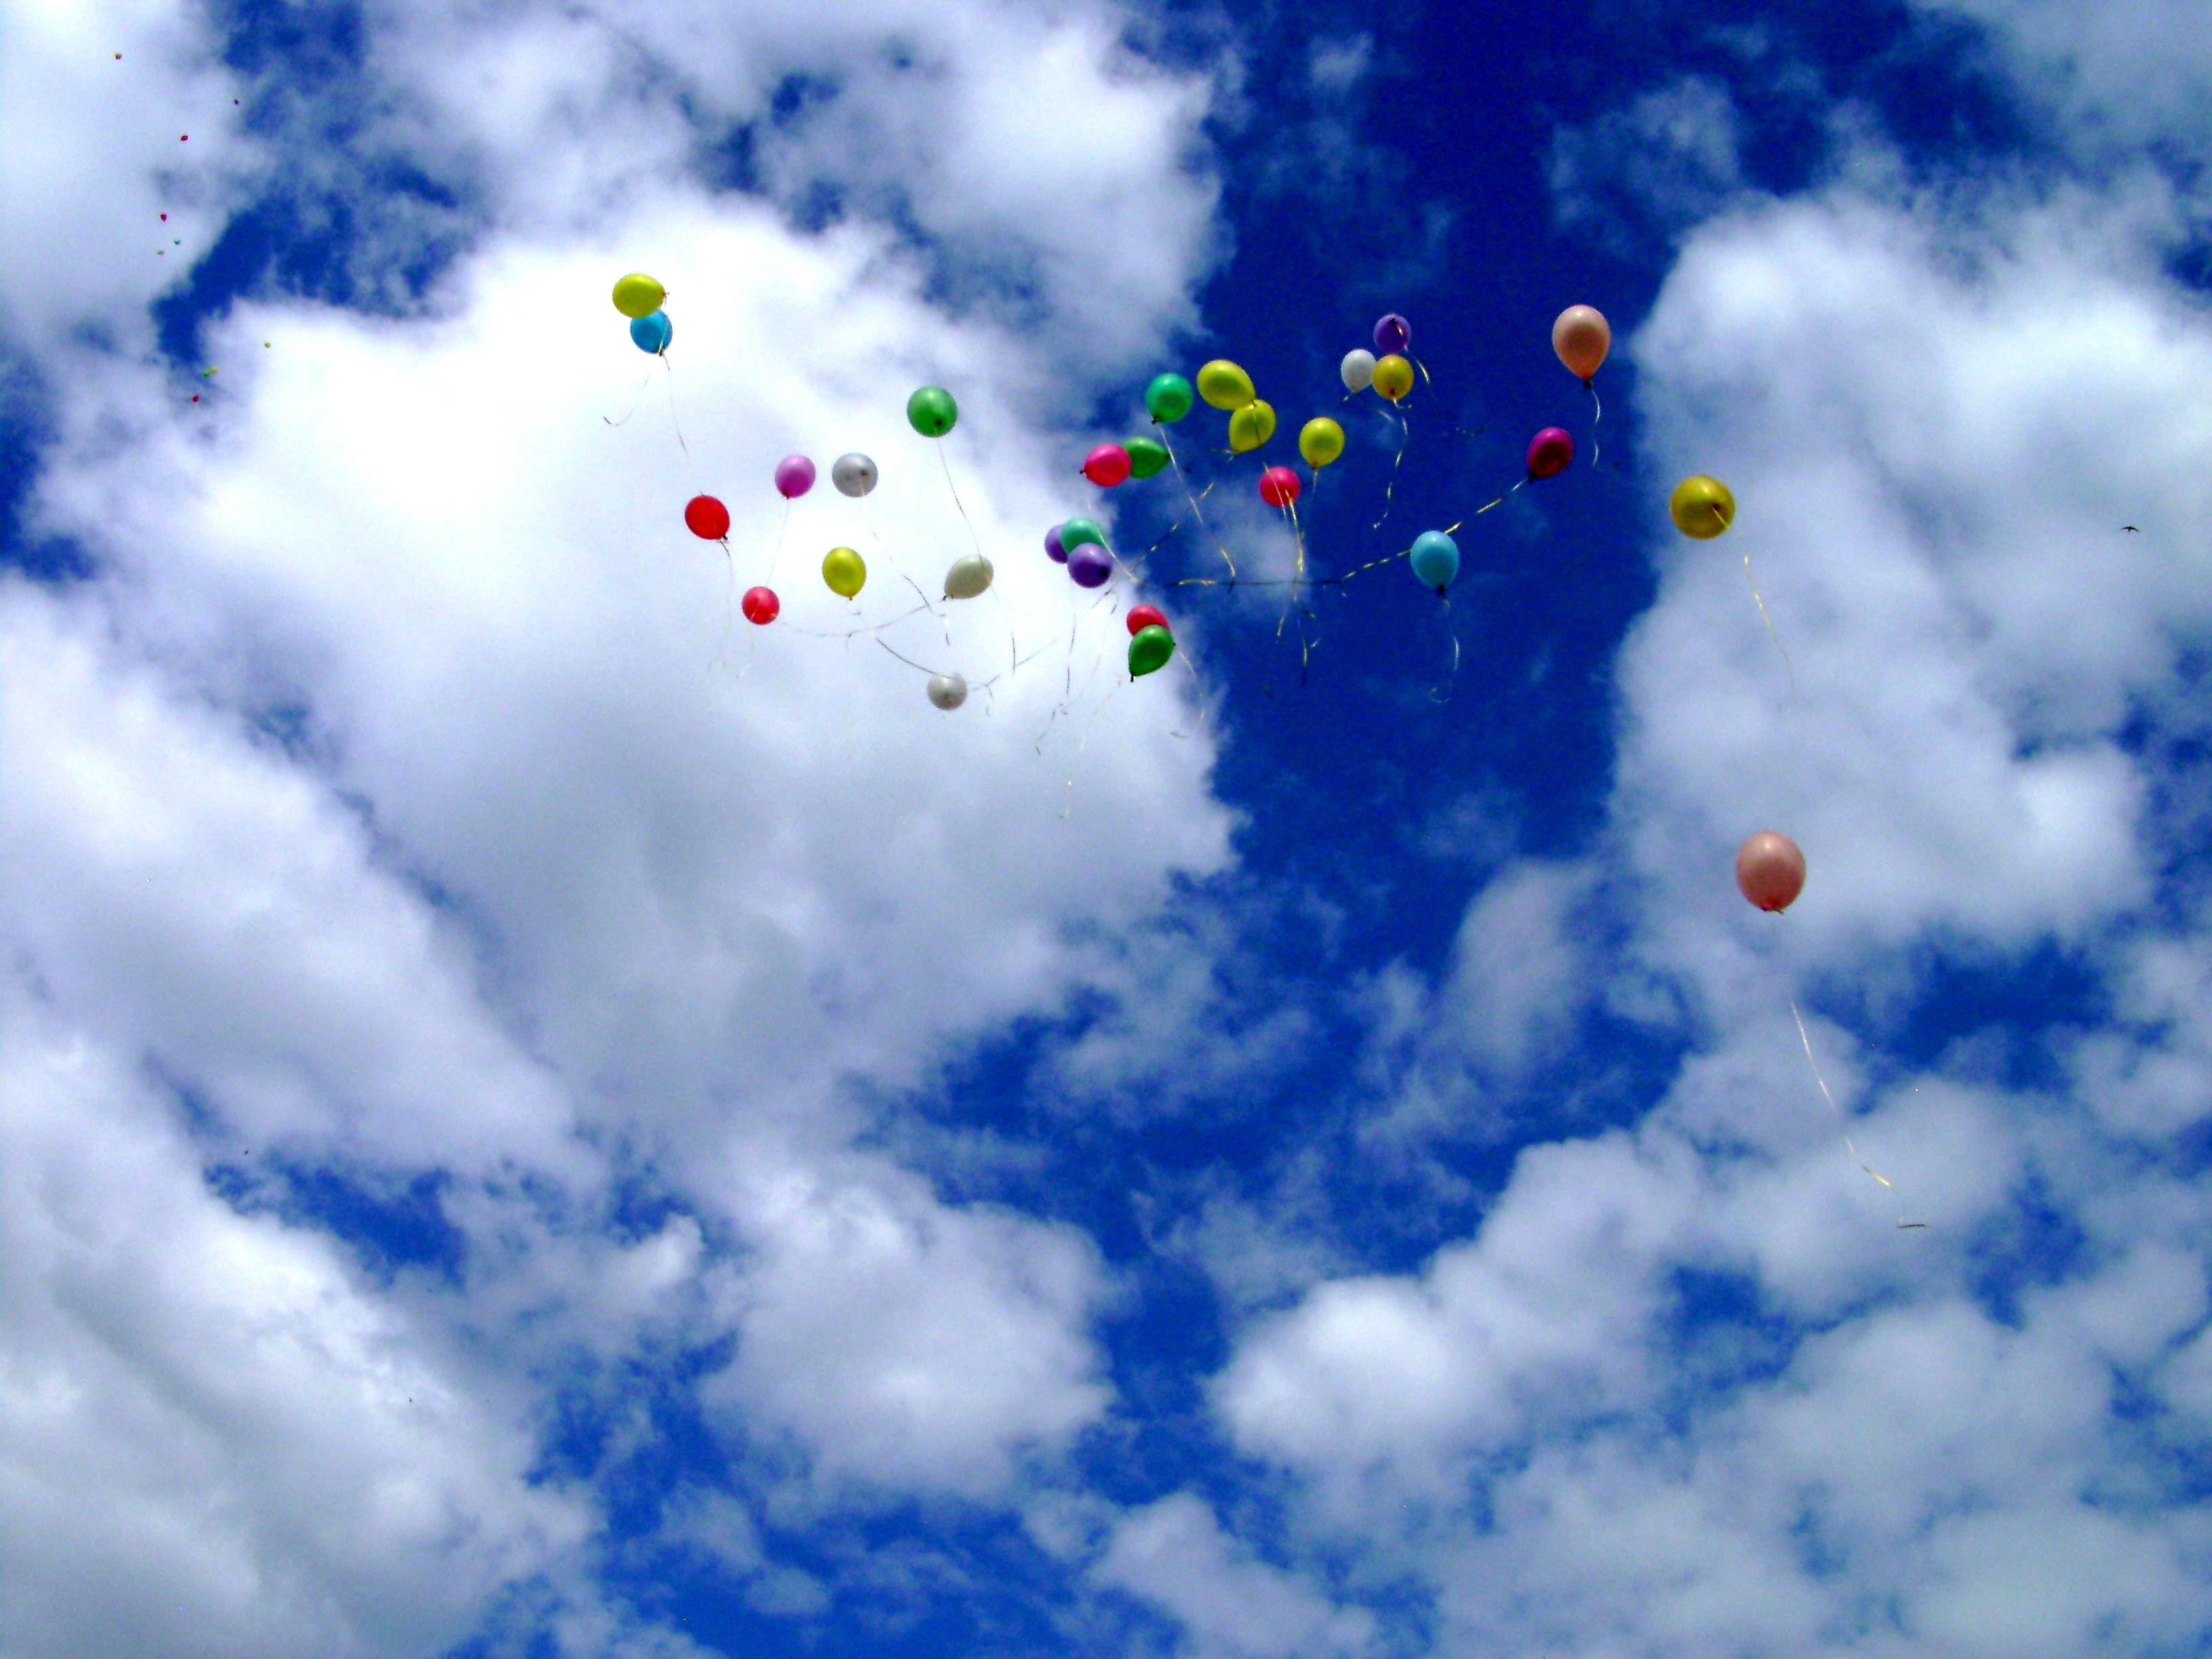 Balloons in the sky by Te-raDa on DeviantArt